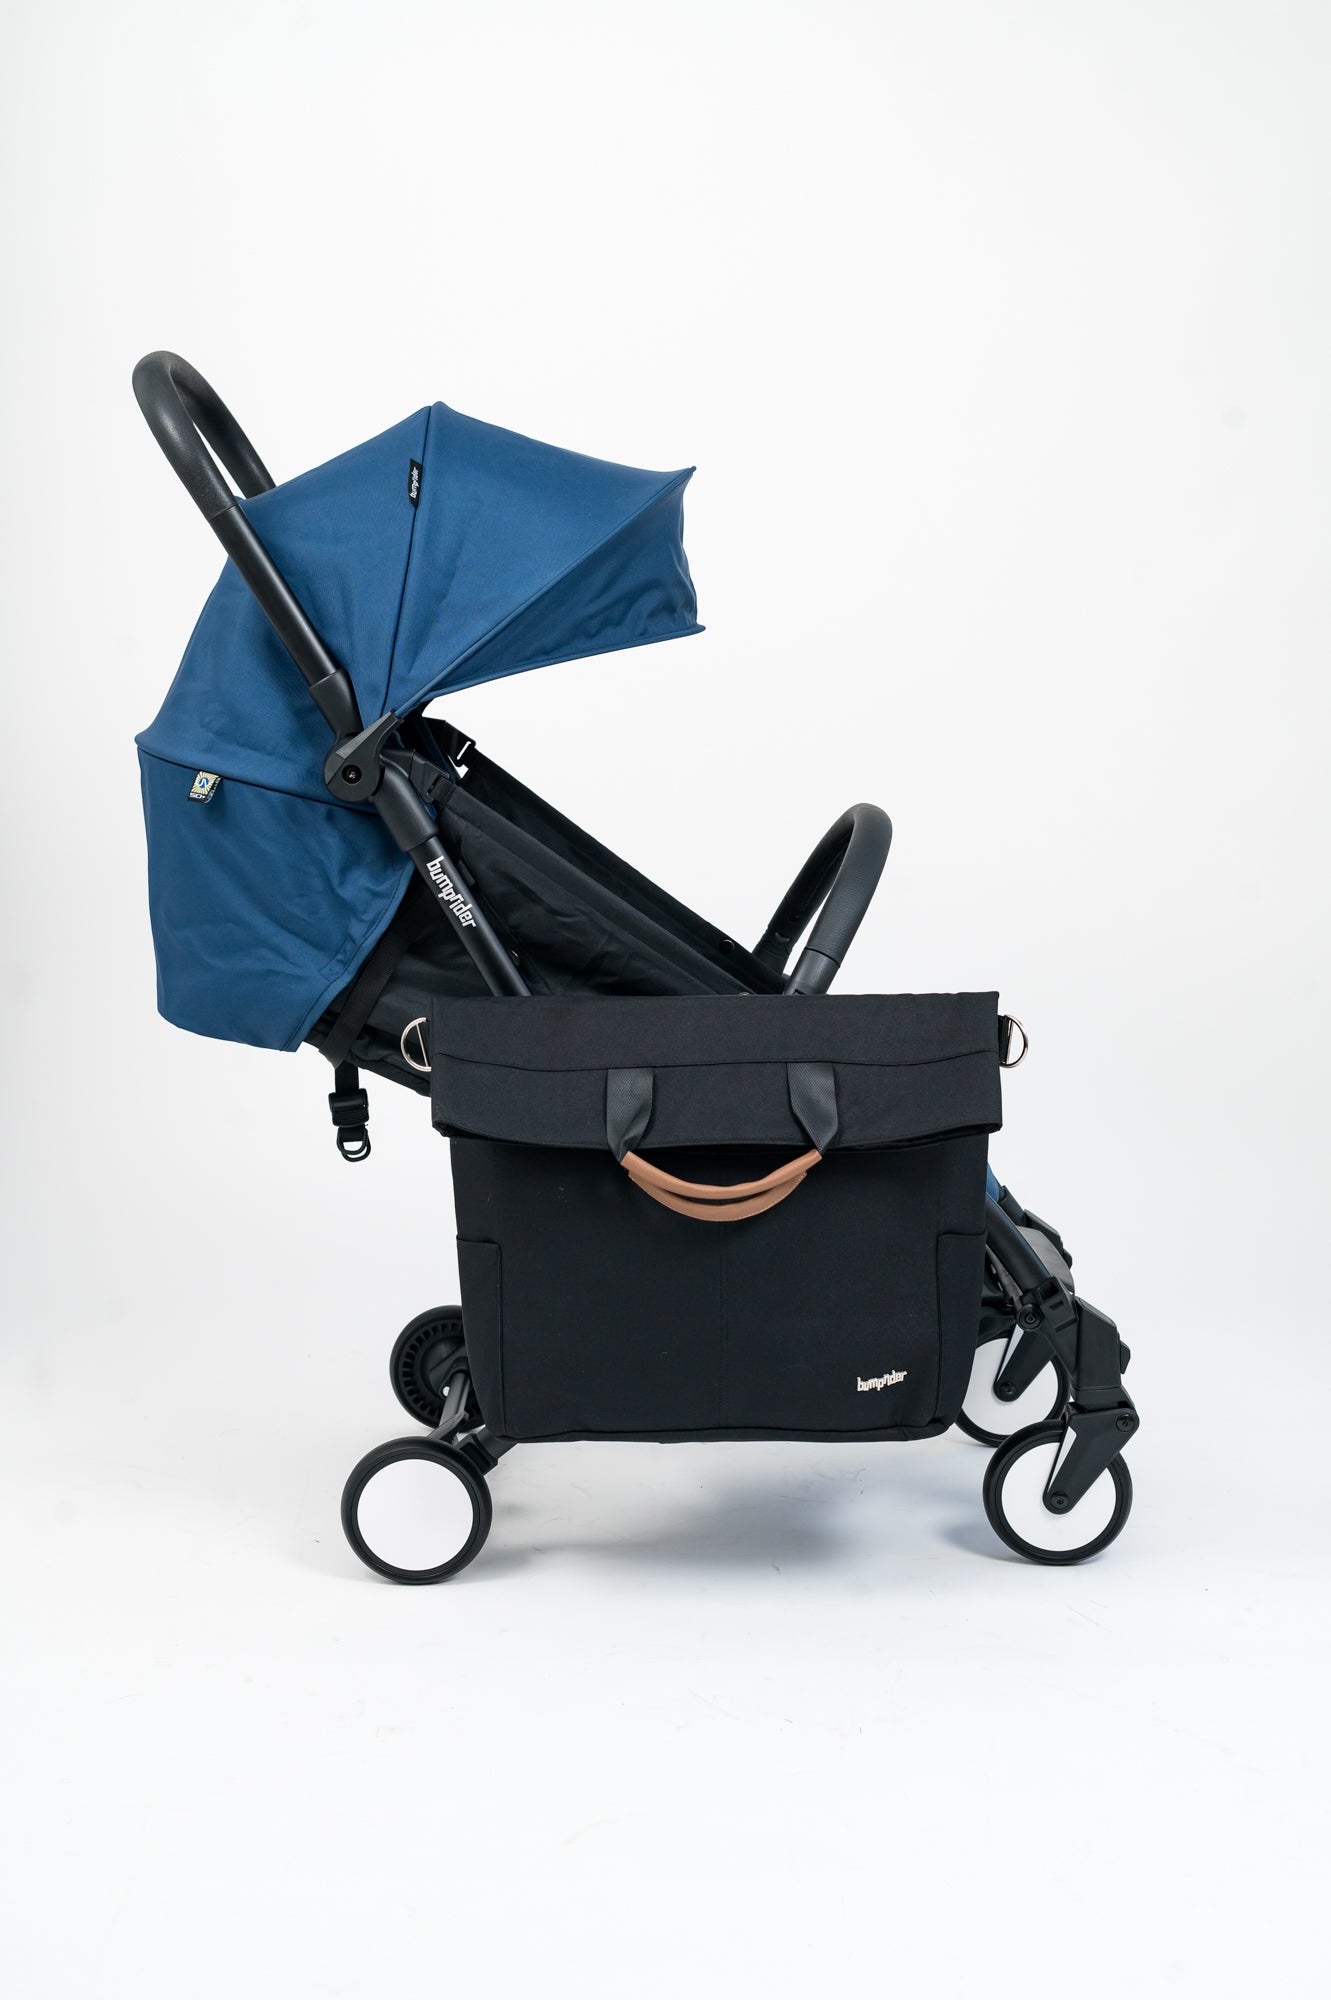 Bumprider Connect 3 in Navy with Sidebag